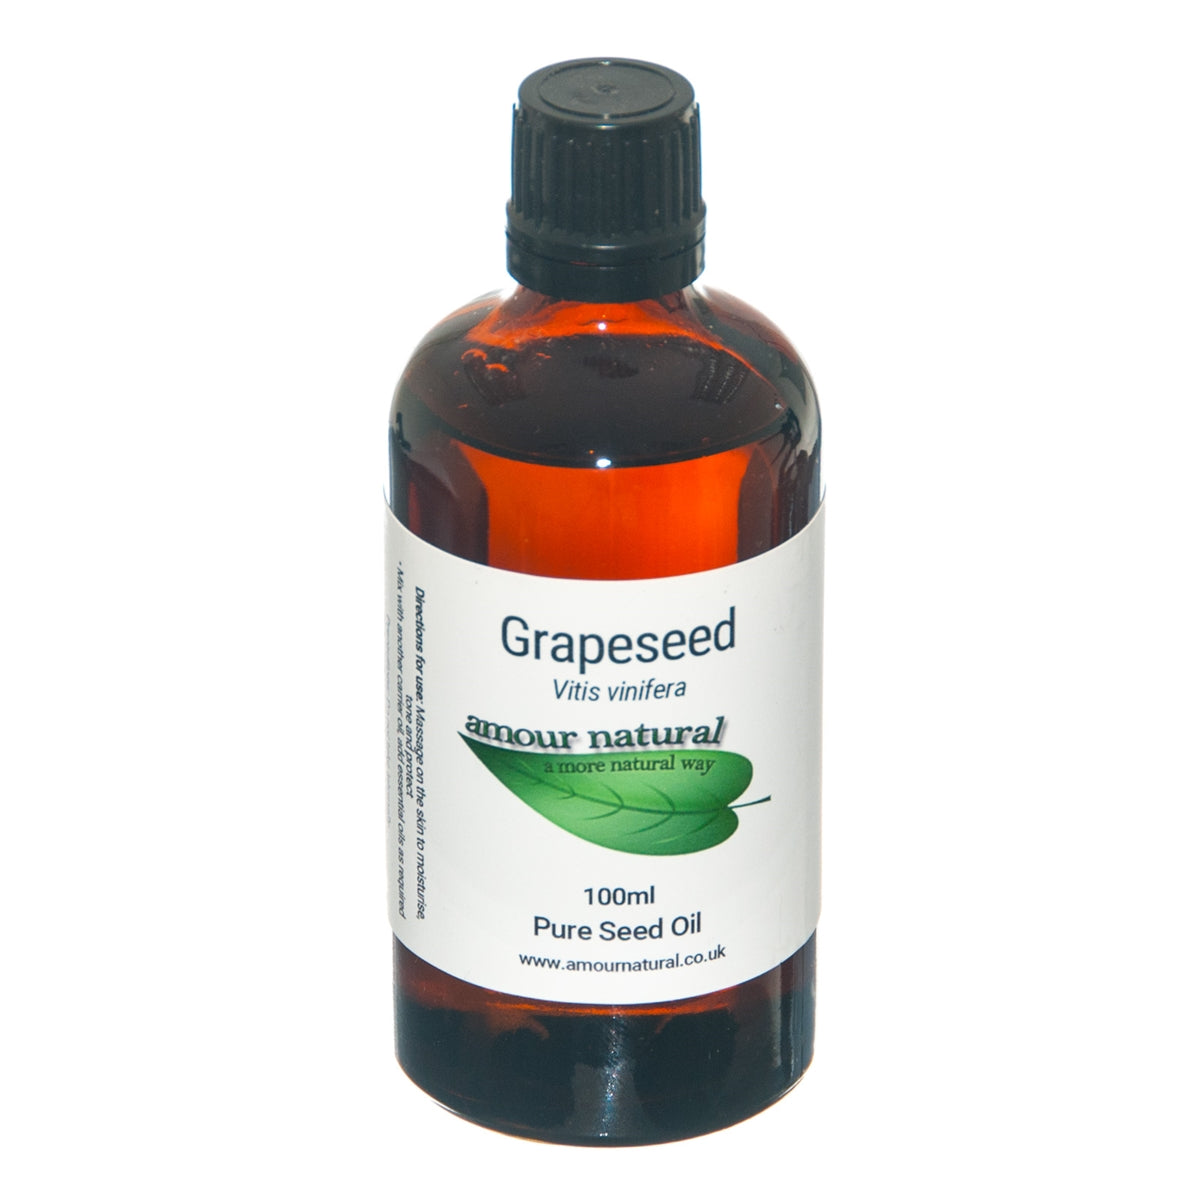 Armour Natural Grapeseed oil 100ml